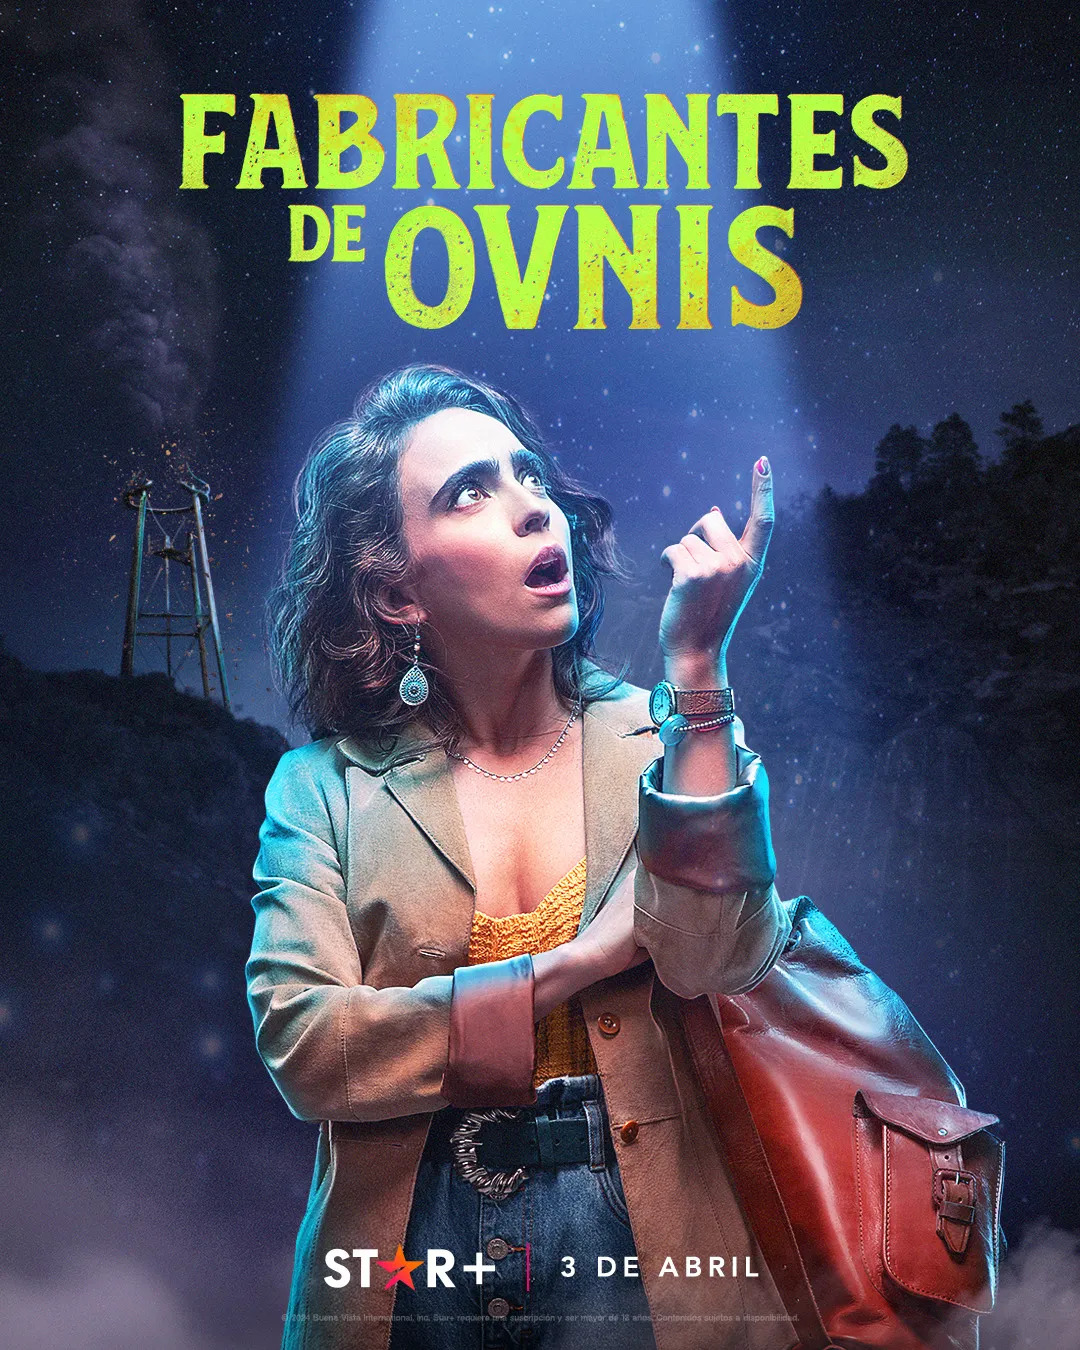 Extra Large TV Poster Image for Fabricante de ovnis (#5 of 11)